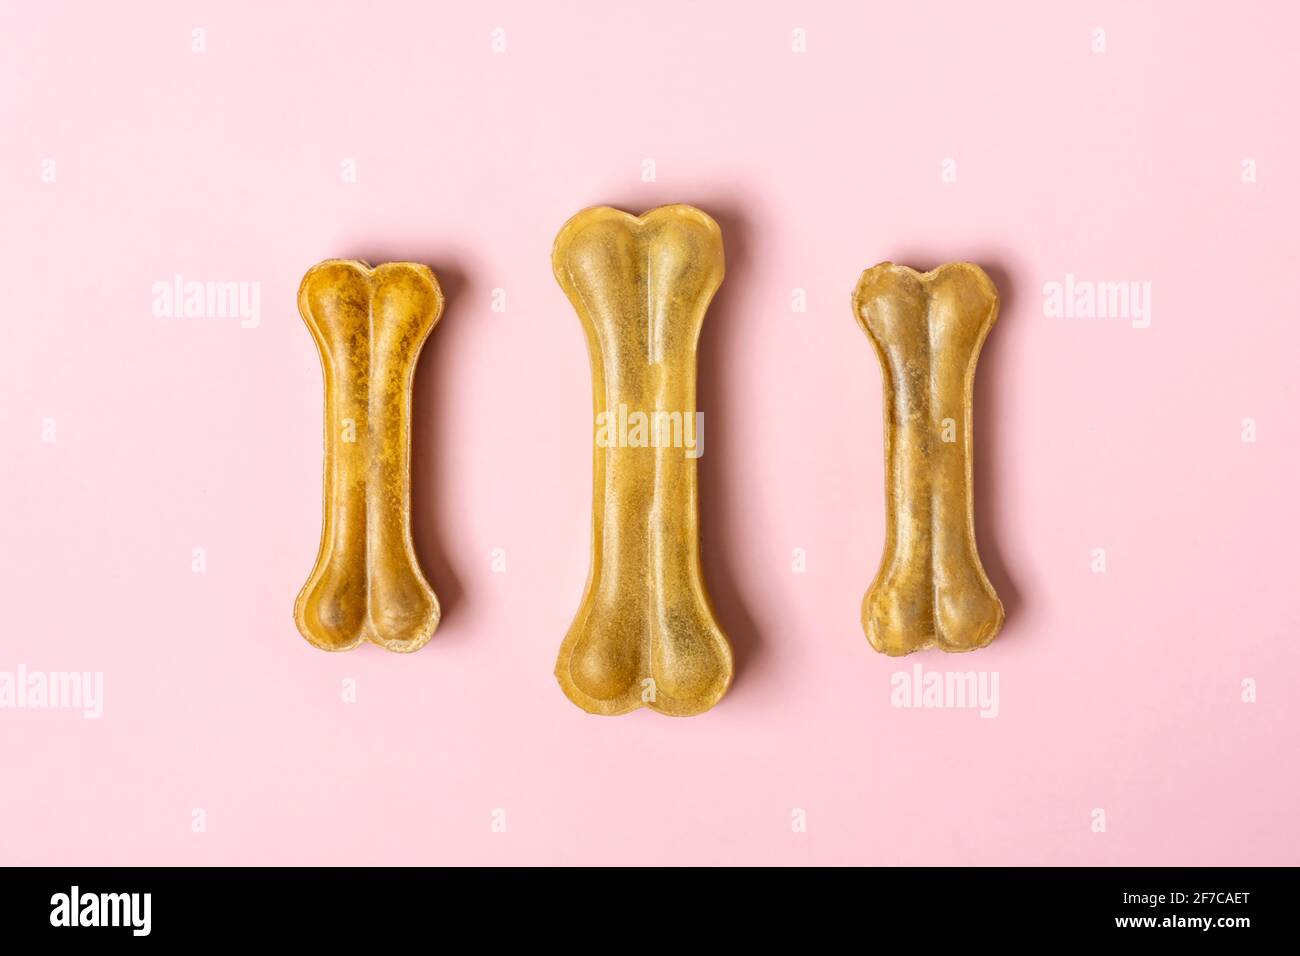 bone for dogs isolated on pink background Top view Flat lay Delicious treat for your beloved pet Food for animals concept. Stock Photo